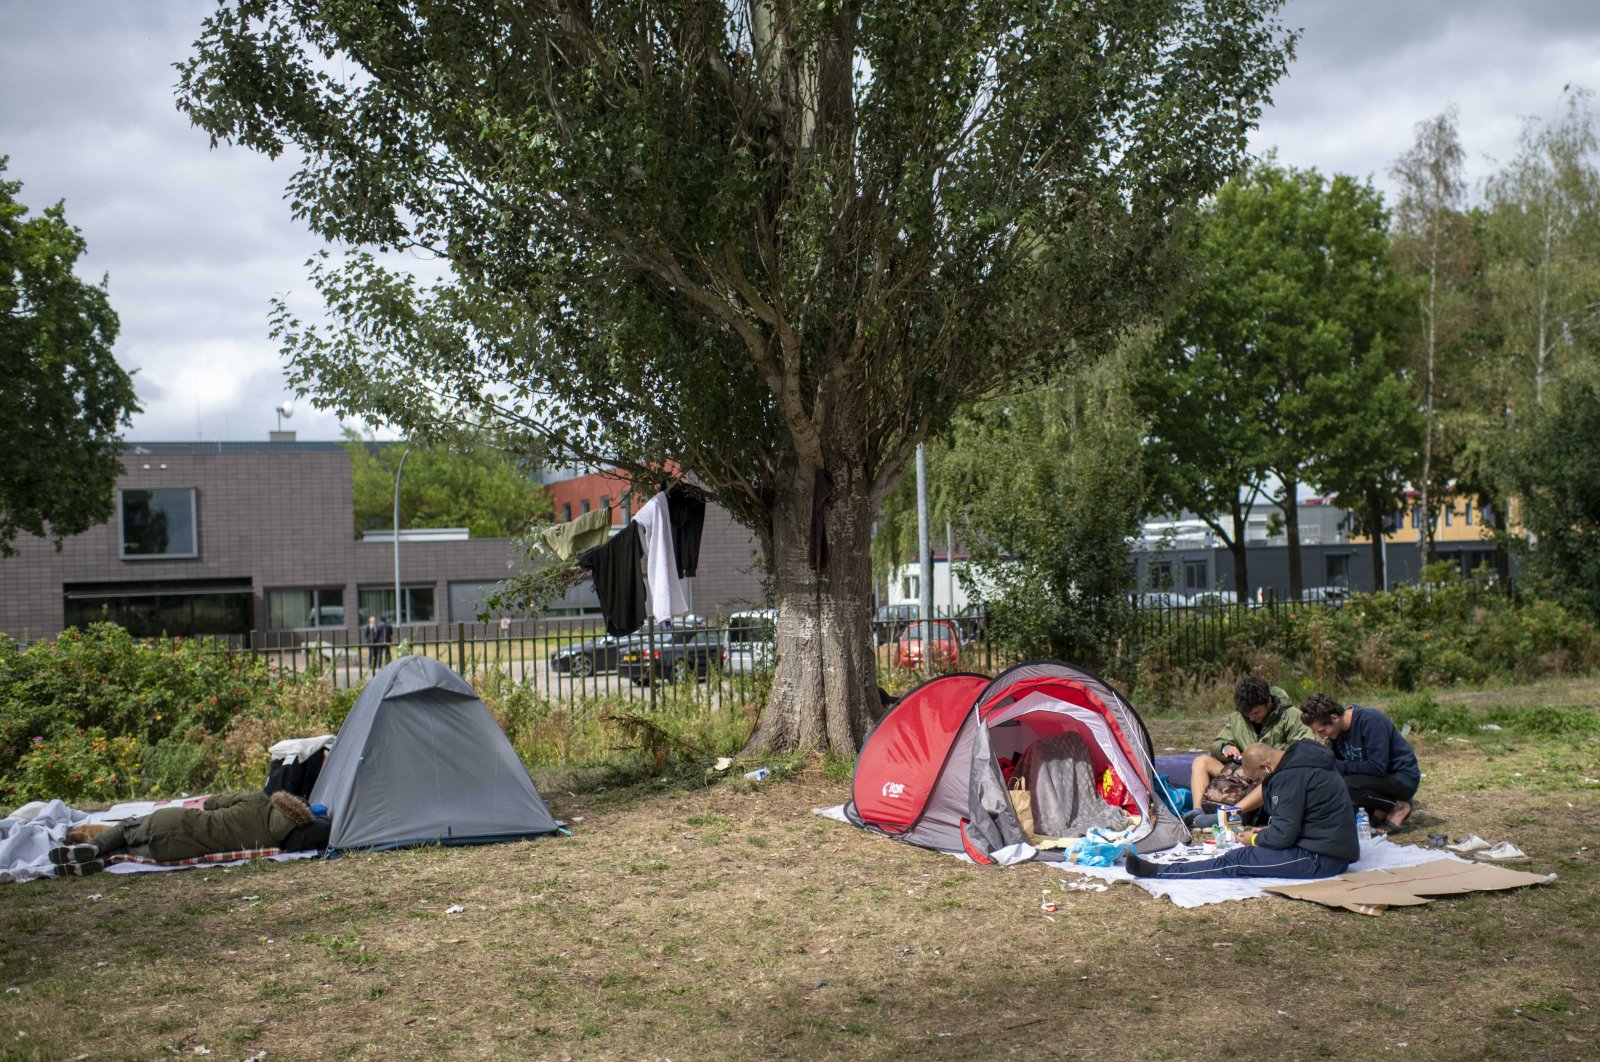 Asylum seekers at the application center in Ter Apel, Netherlands, Aug. 27, 2022. (EPA Photo)